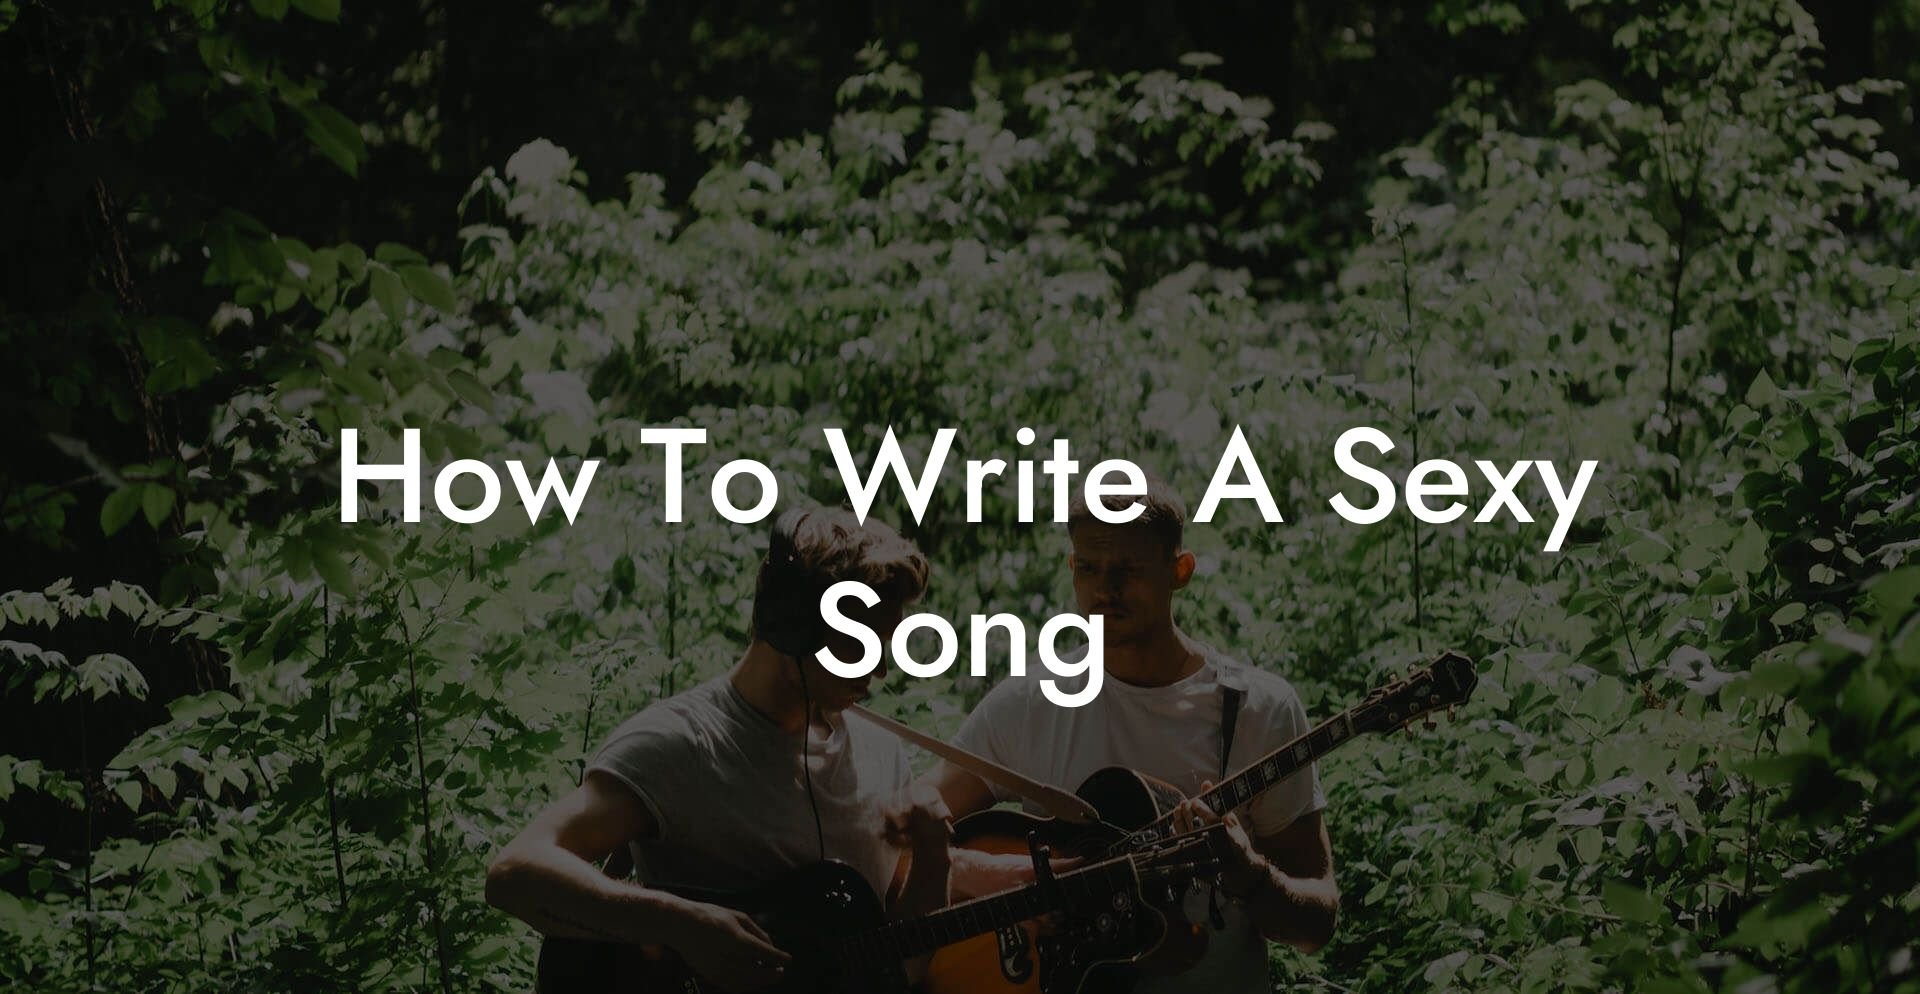 how to write a sexy song lyric assistant